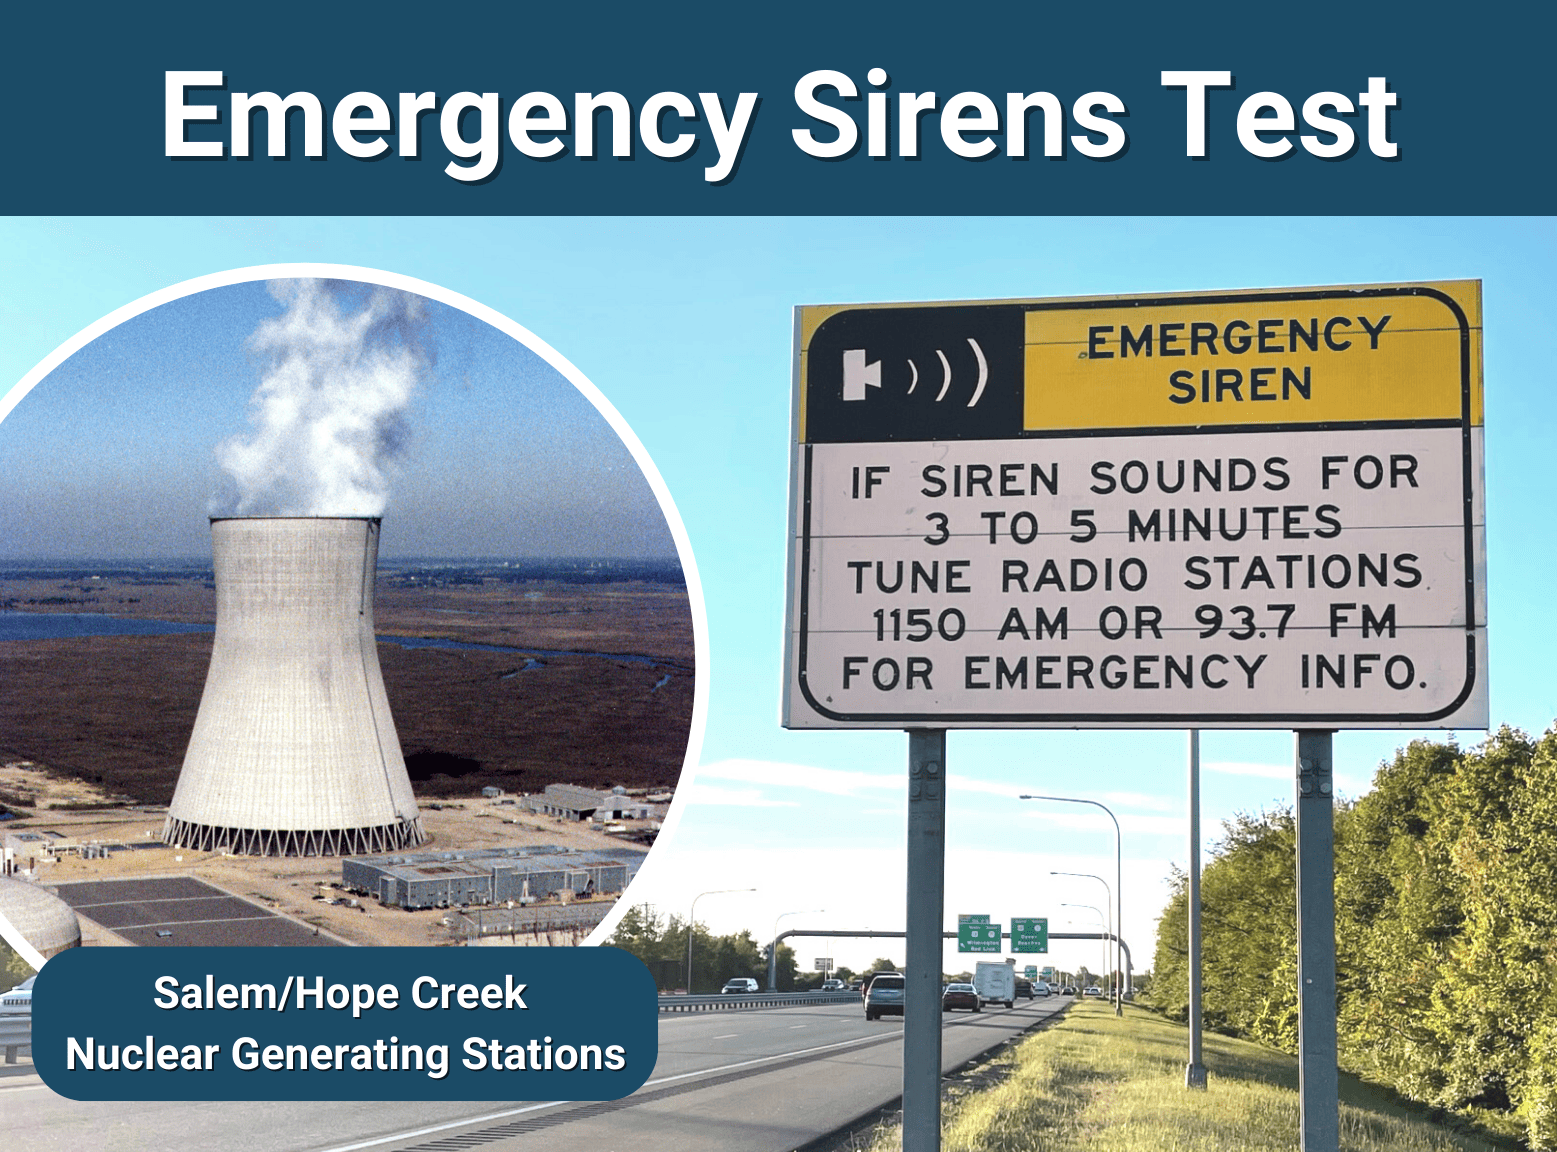 Salem/Hope Creek Nuclear Generating Stations will sound alarms for their quarterly tests within 10 miles of it.  